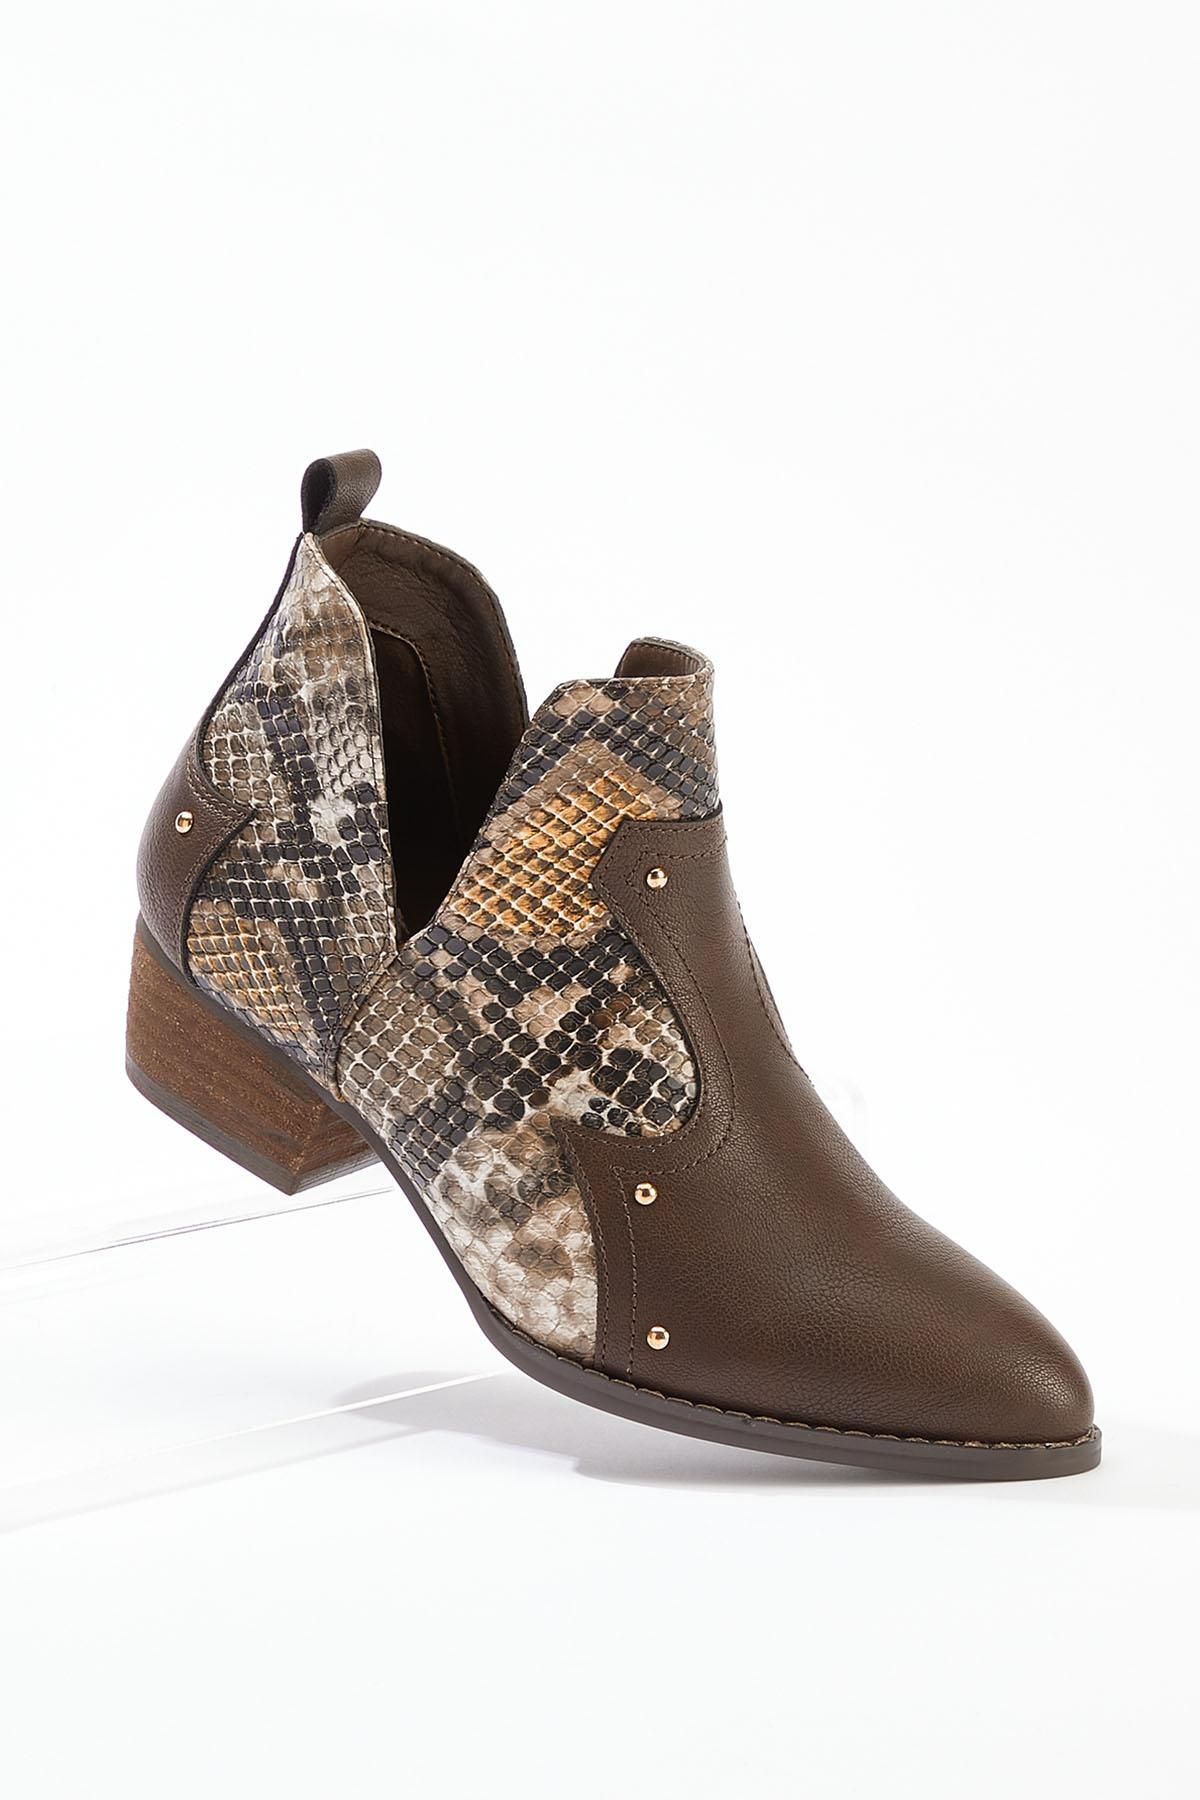 Western Snake Booties | Cato Fashions